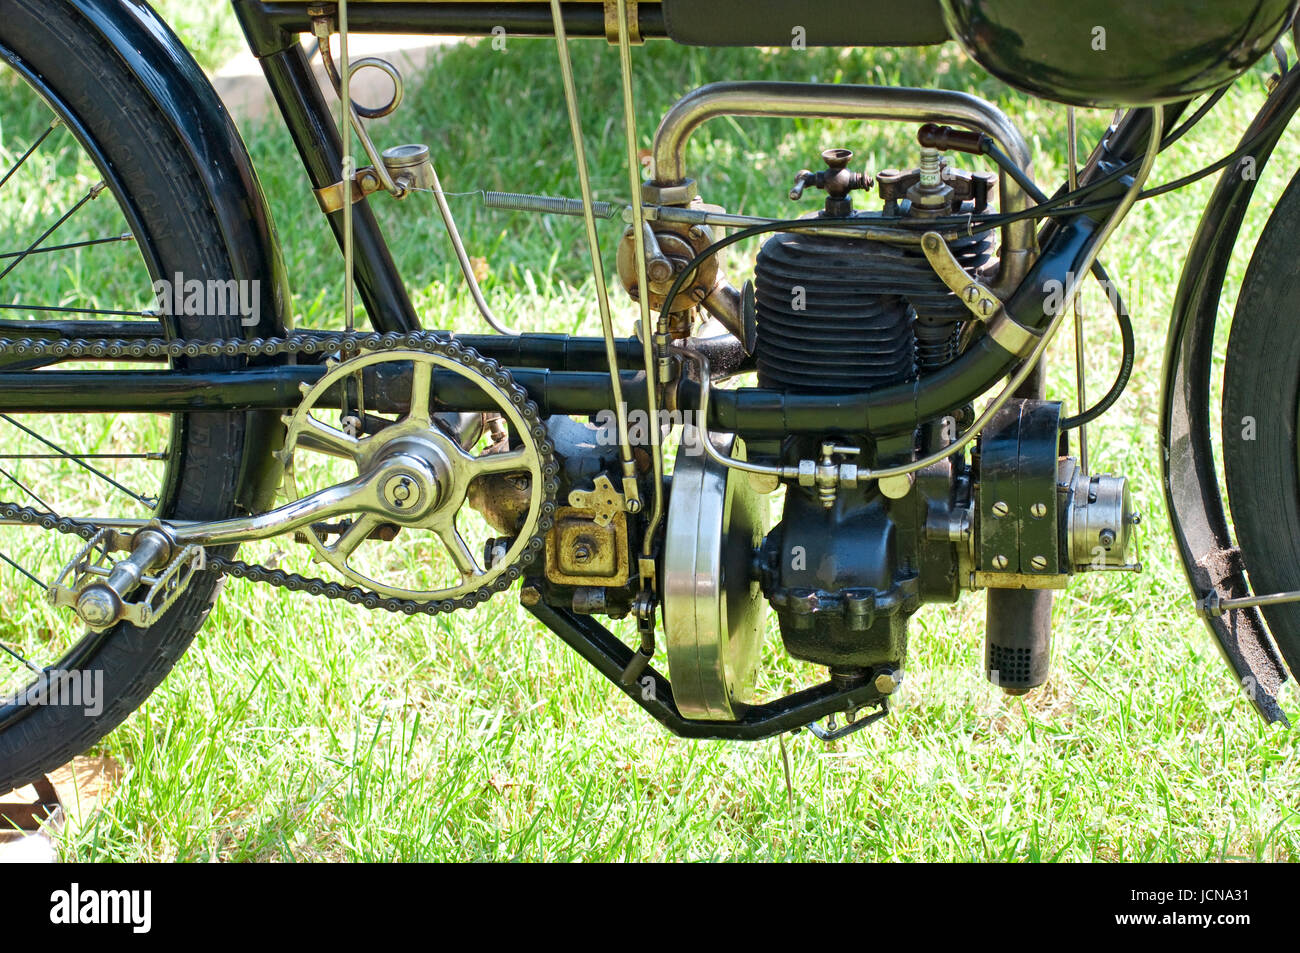 FN Standard  Classic Motorcycle by 1911, Engine Motorcycle Stock Photo